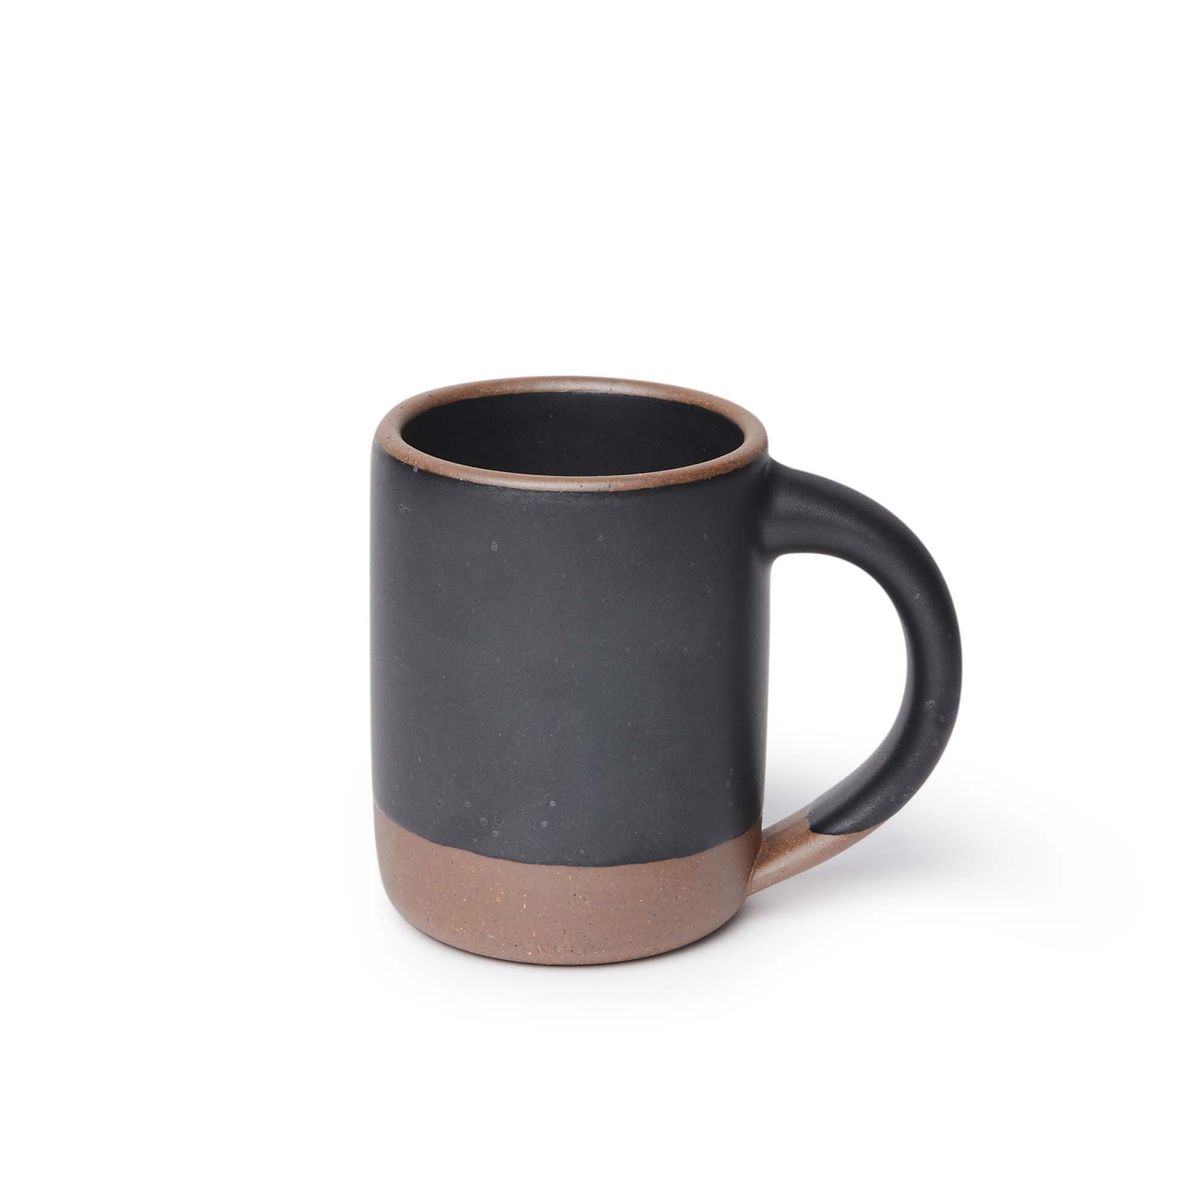 A medium sized ceramic mug with handle in a graphite black color featuring iron speckles and unglazed rim and bottom base.